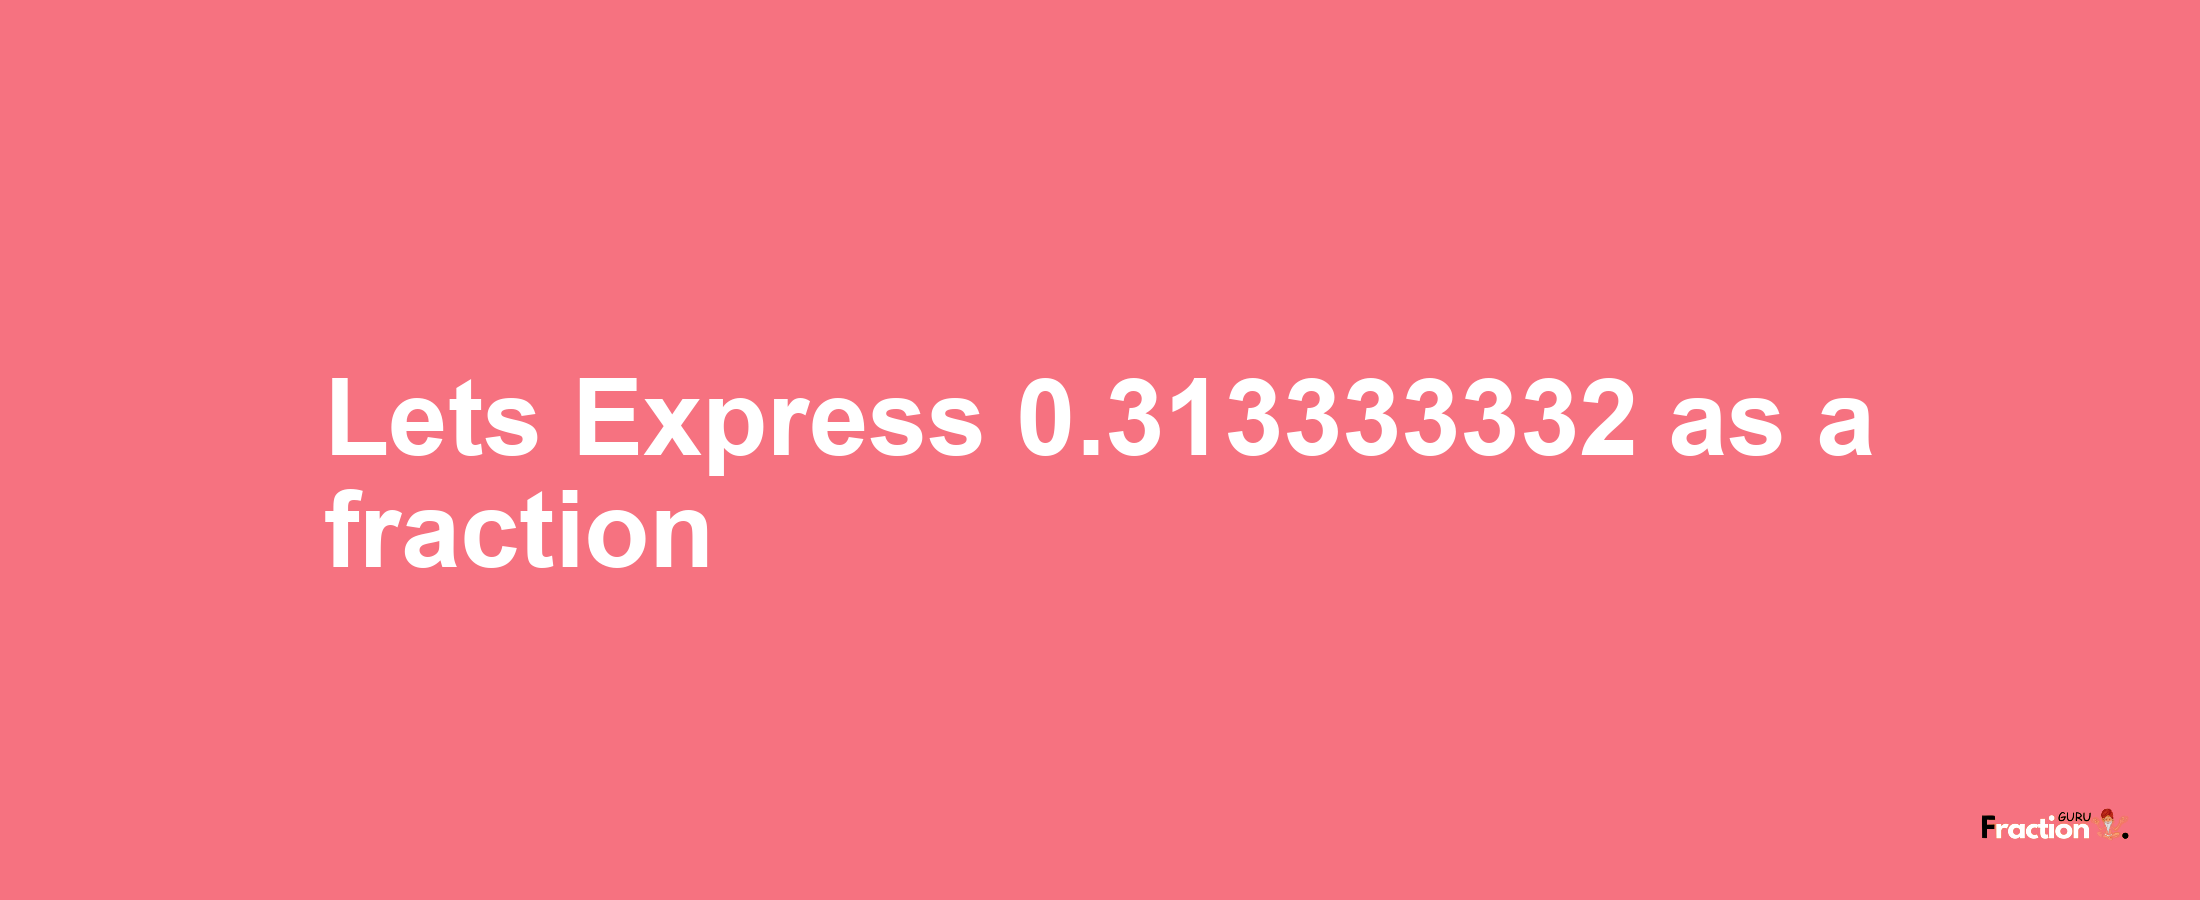 Lets Express 0.313333332 as afraction